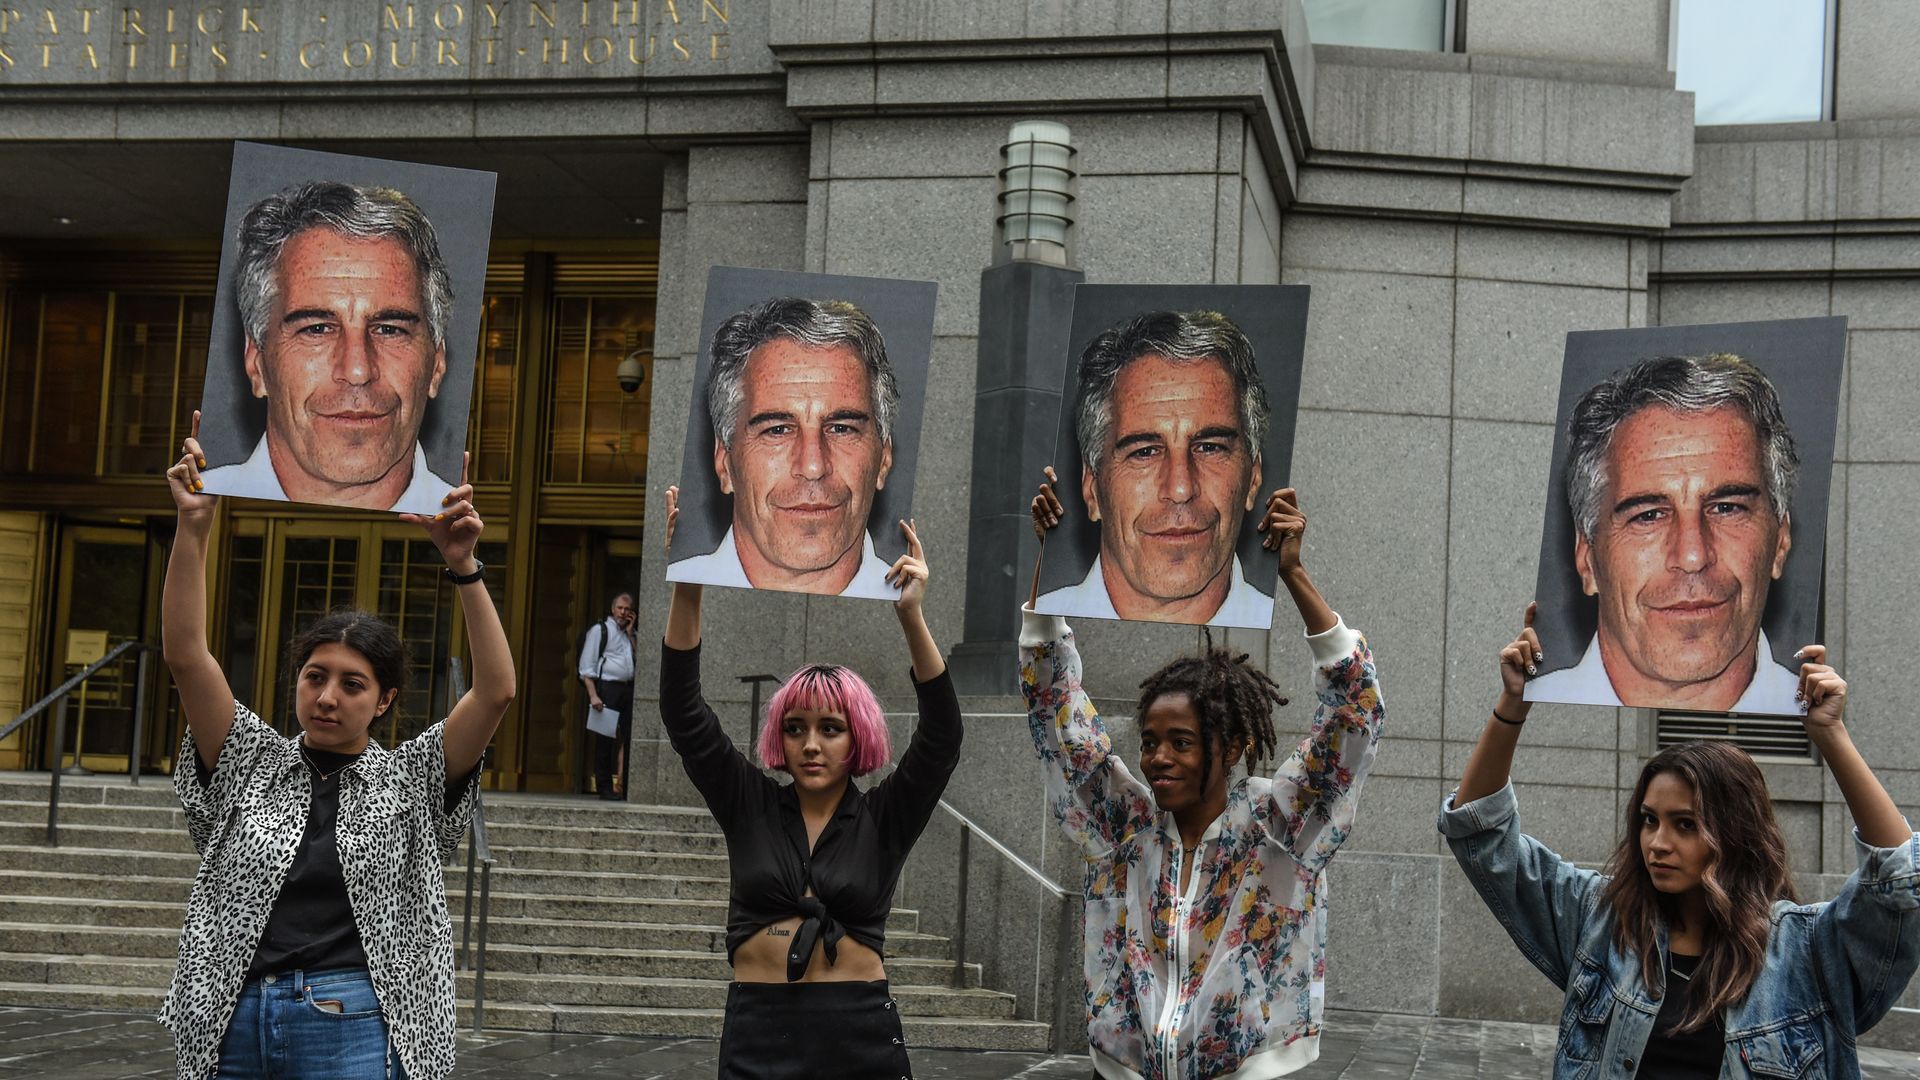 A protest group called "Hot Mess" hold up signs of Jeffrey Epstein in front of the Federal courthouse in New York City last July. 